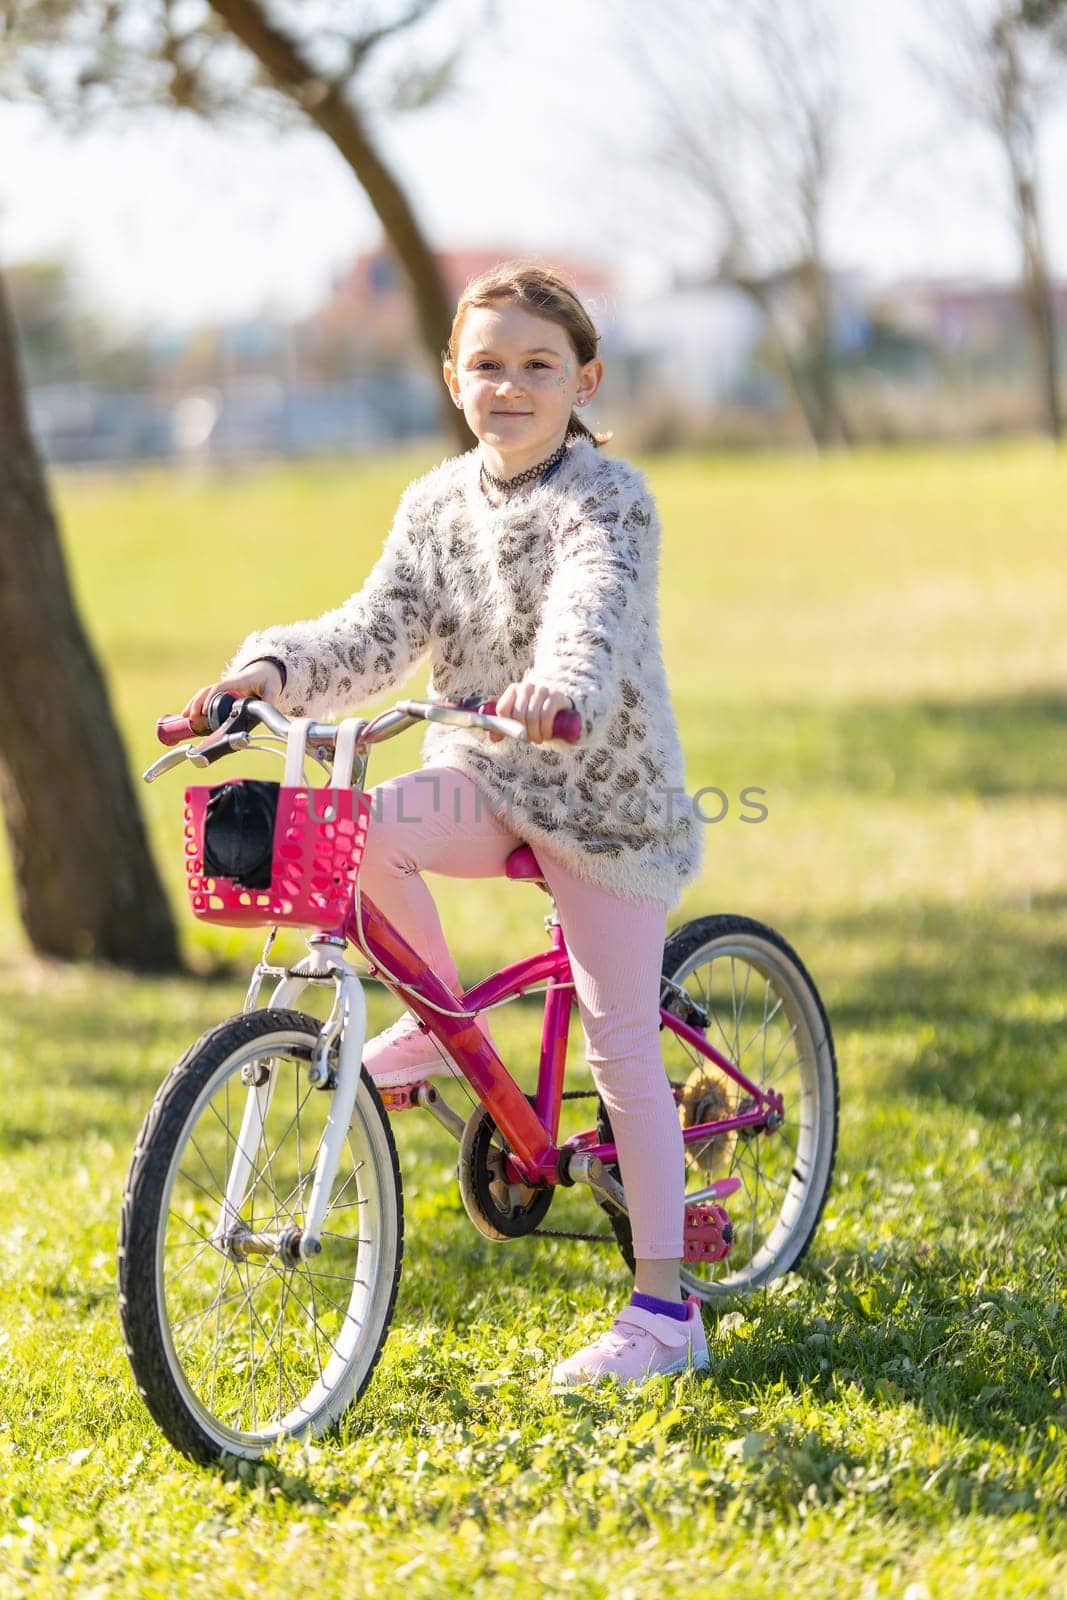 A young girl is sitting on a pink bicycle in a park. She is wearing a pink sweater and pink pants